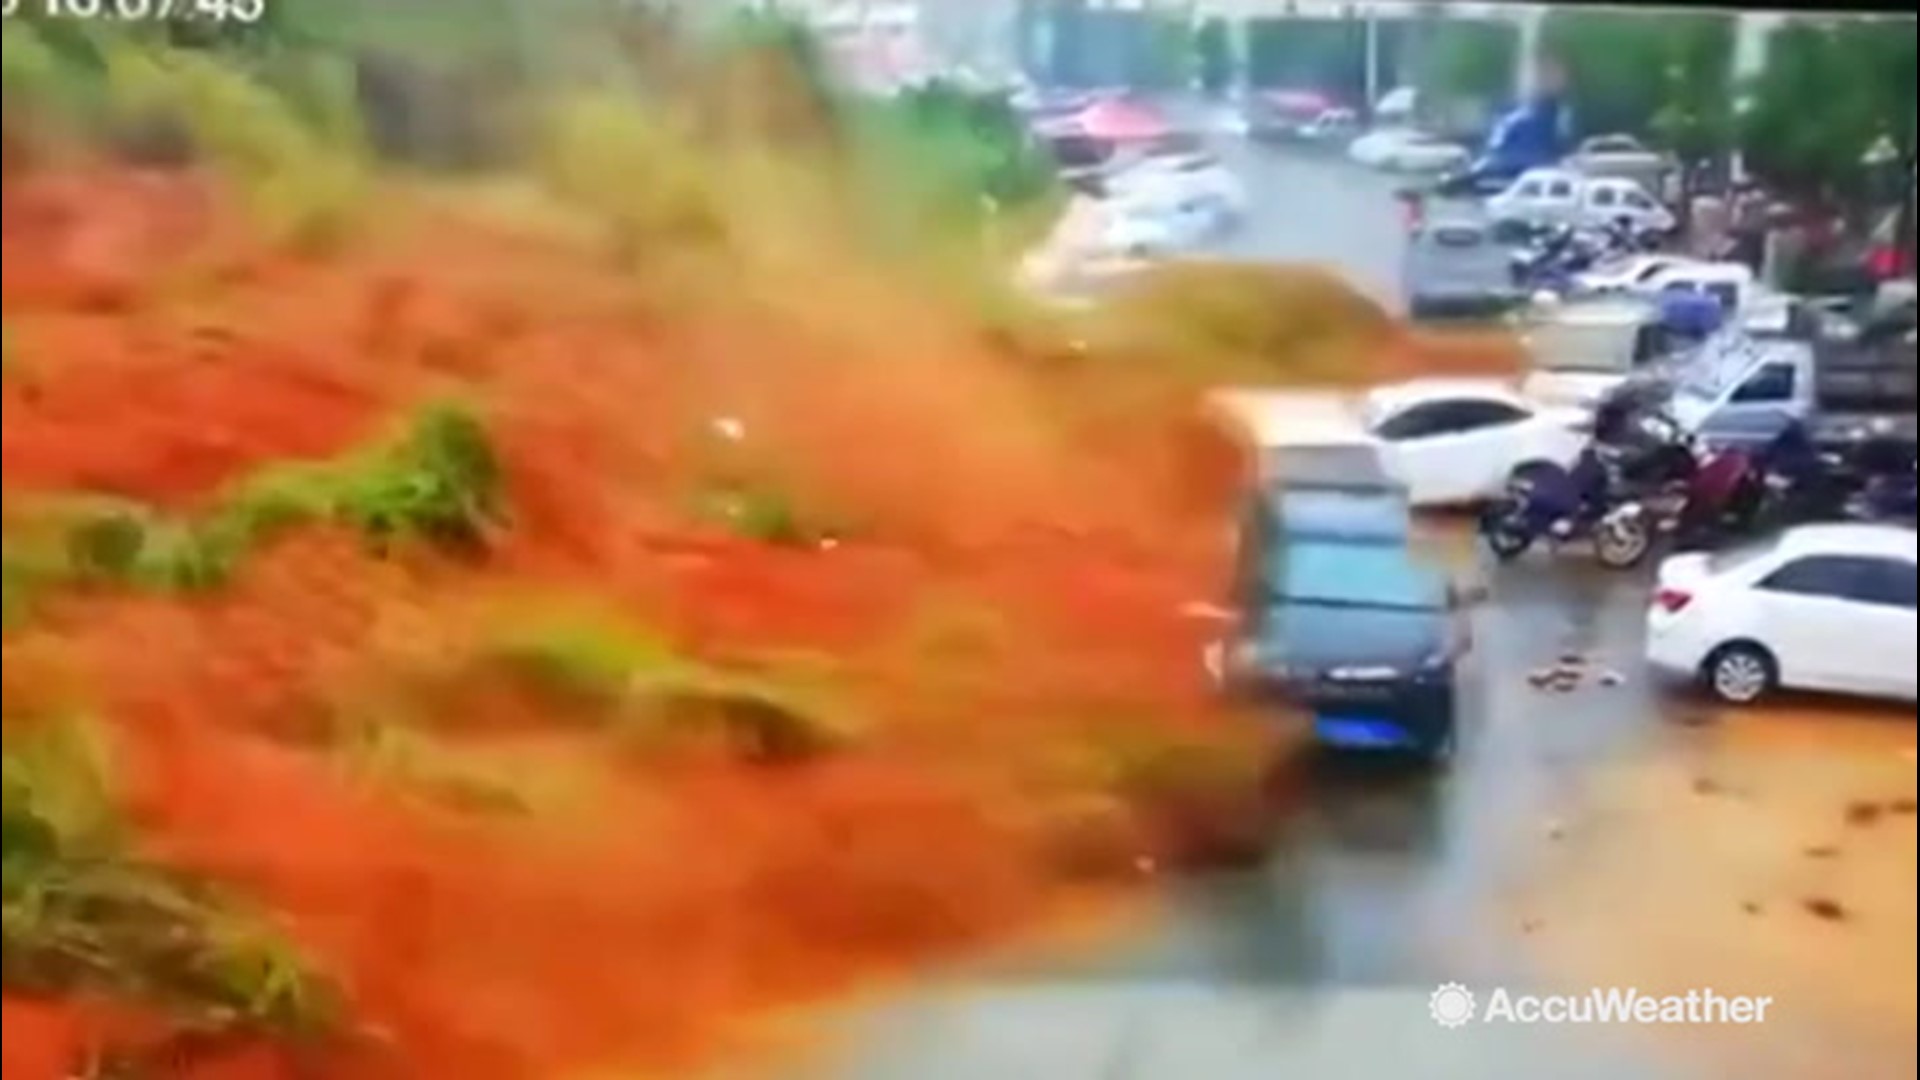 A strong rainstorm triggered this massive landslide in China's Fujian province on June 13.  It was so powerful that it knocked over these parked vehicles like they were nothing.  No deaths were reported in the incident.